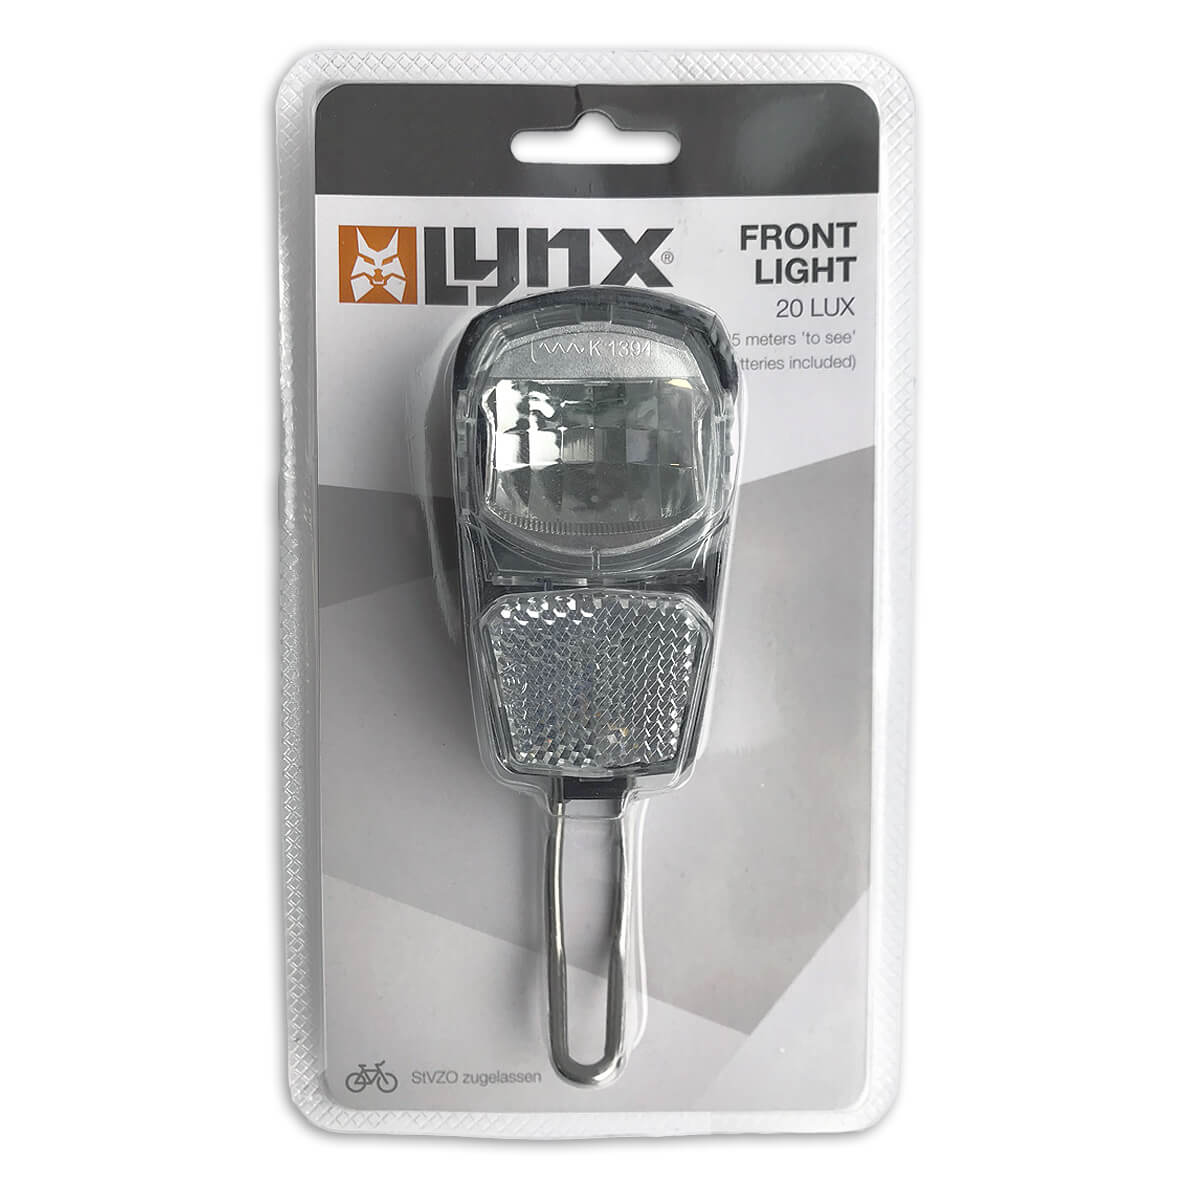 Lynx Headlight Clever 20 Lux